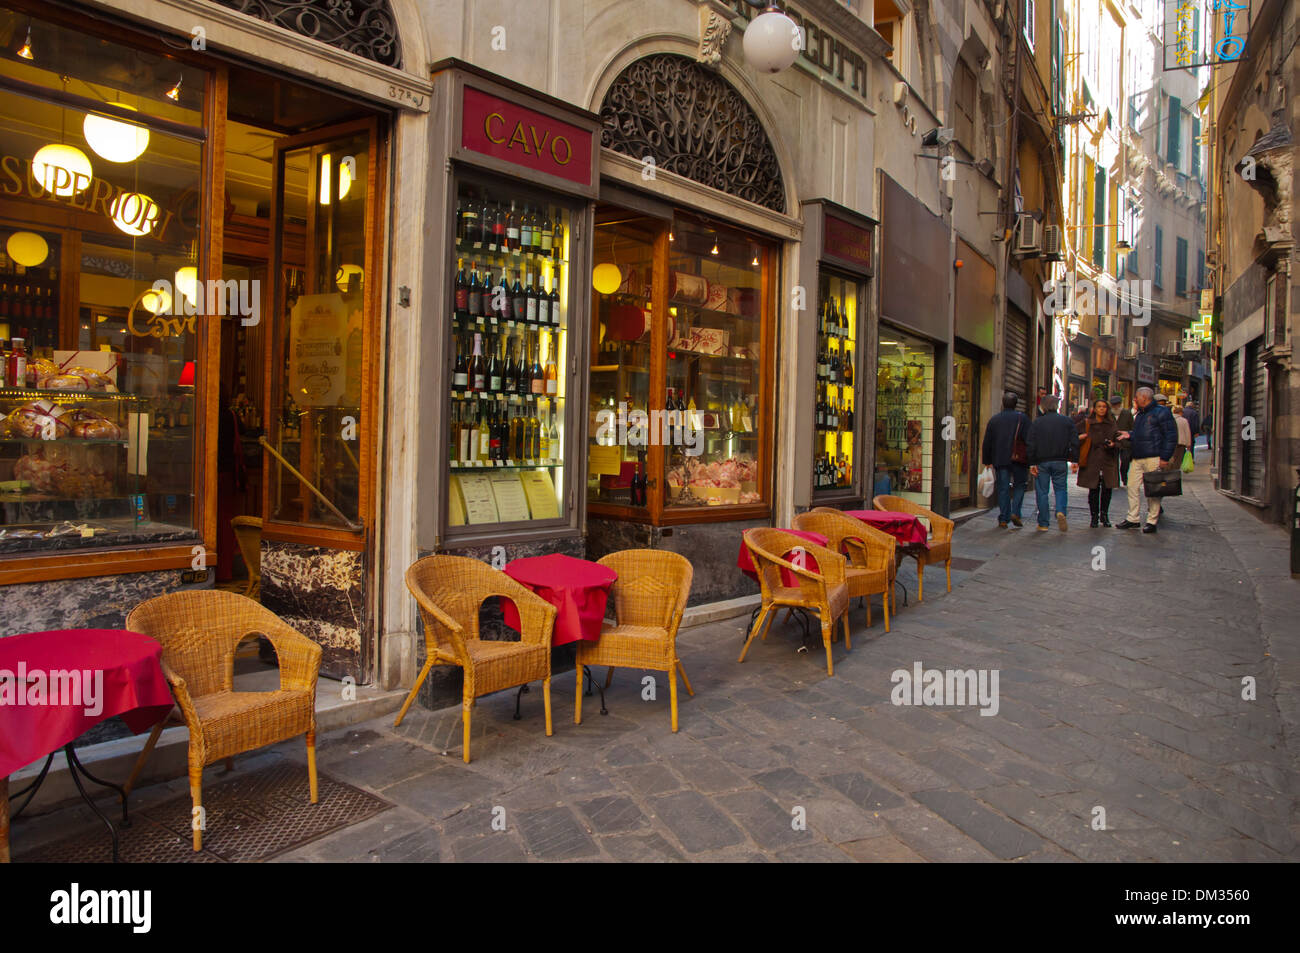 Alley with a cafe terrace centro storico old town Genoa Liguria region Italy Europe Stock Photo